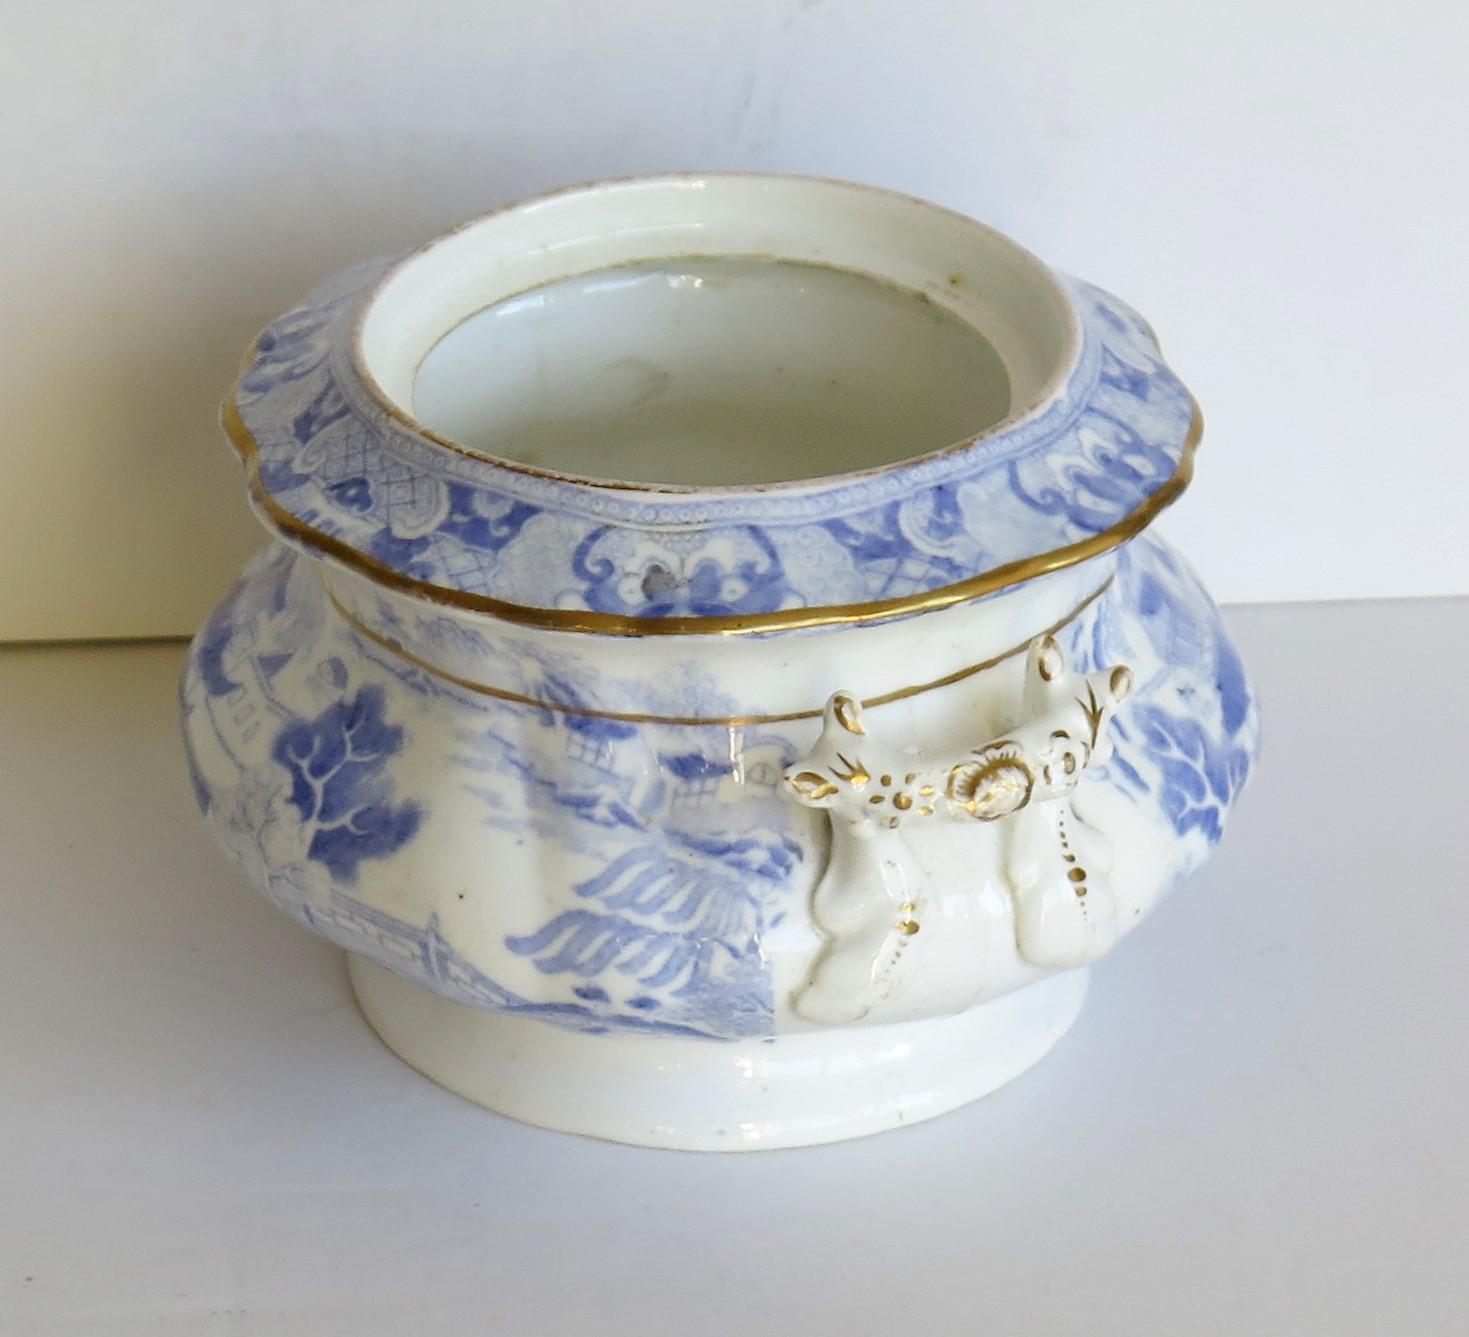 Miles Mason Porcelain Sucrier Blue and White Broseley Willow Pattern, circa 1810 For Sale 1